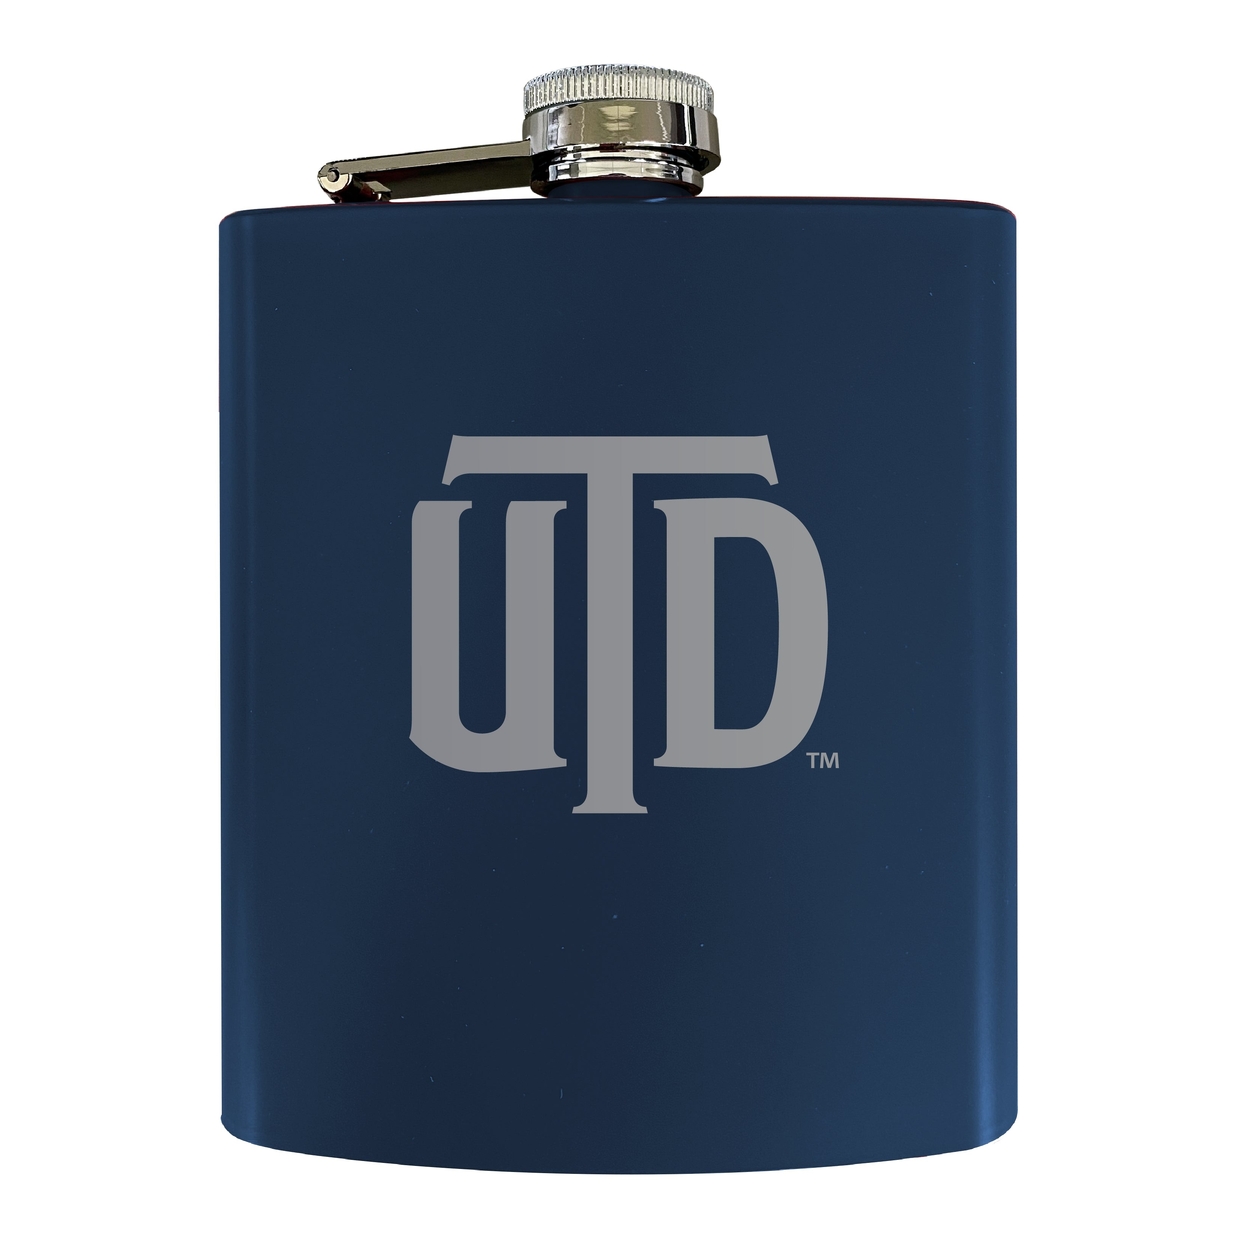 University Of Texas At Dallas Stainless Steel Etched Flask - Choose Your Color - Seafoam